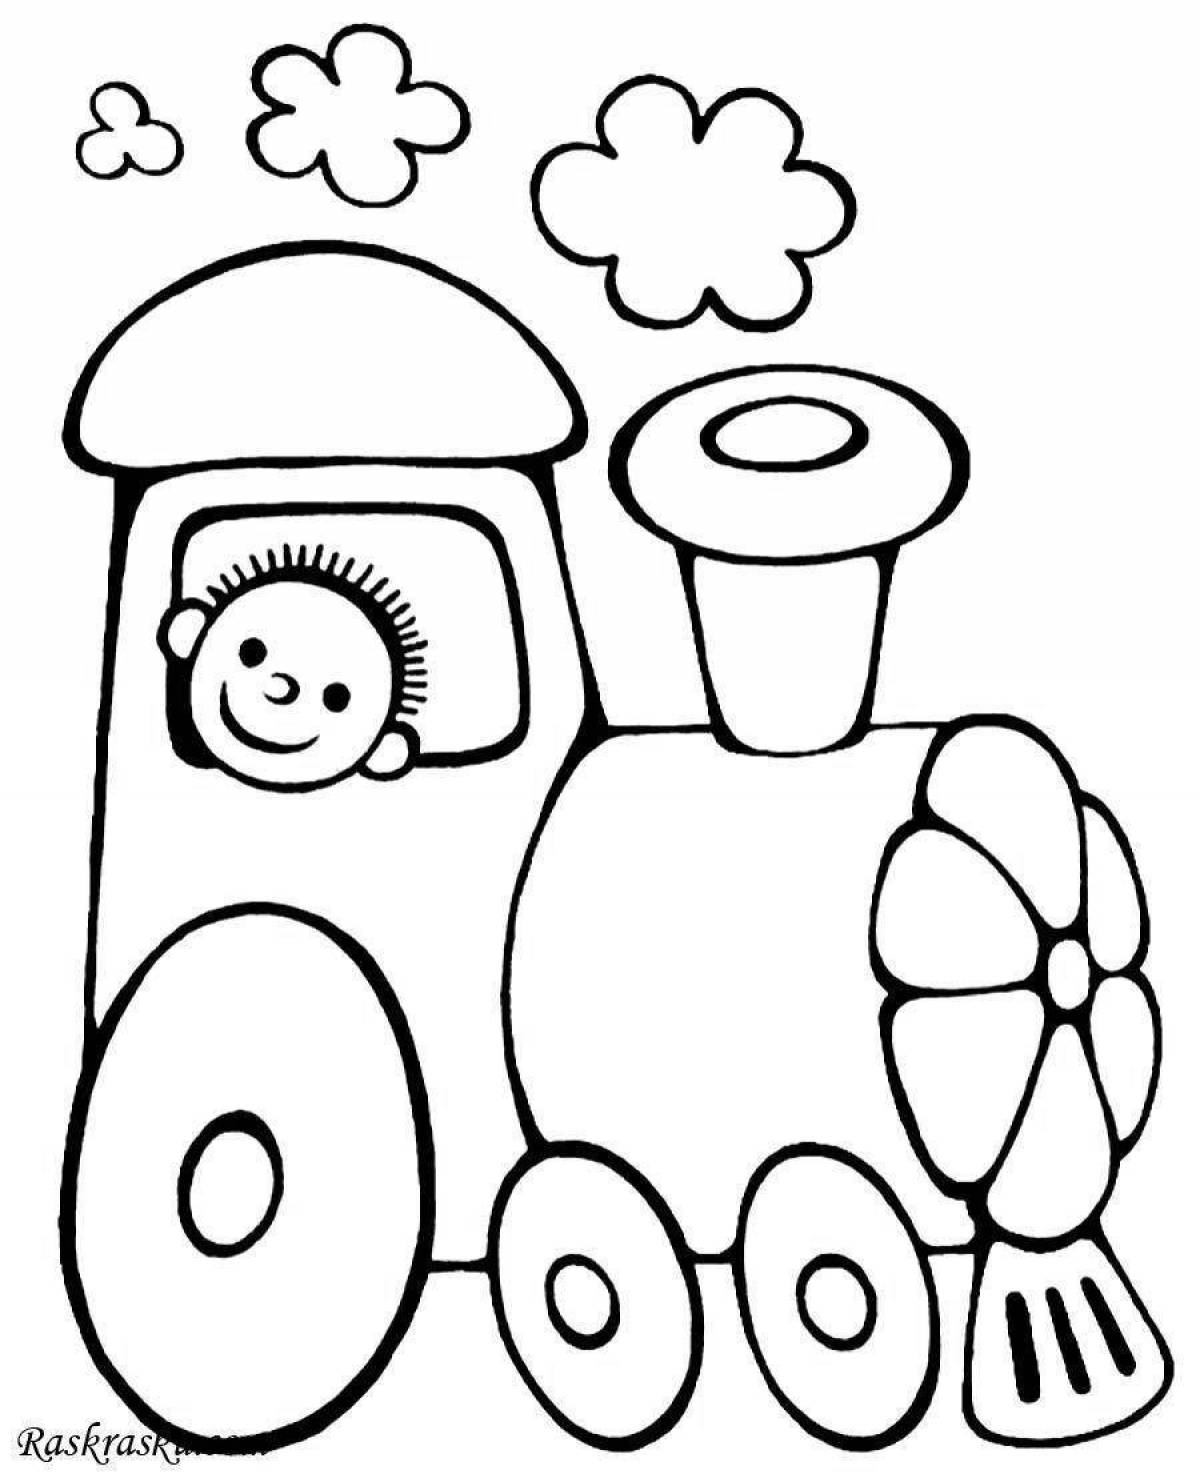 Outstanding train coloring page for kids